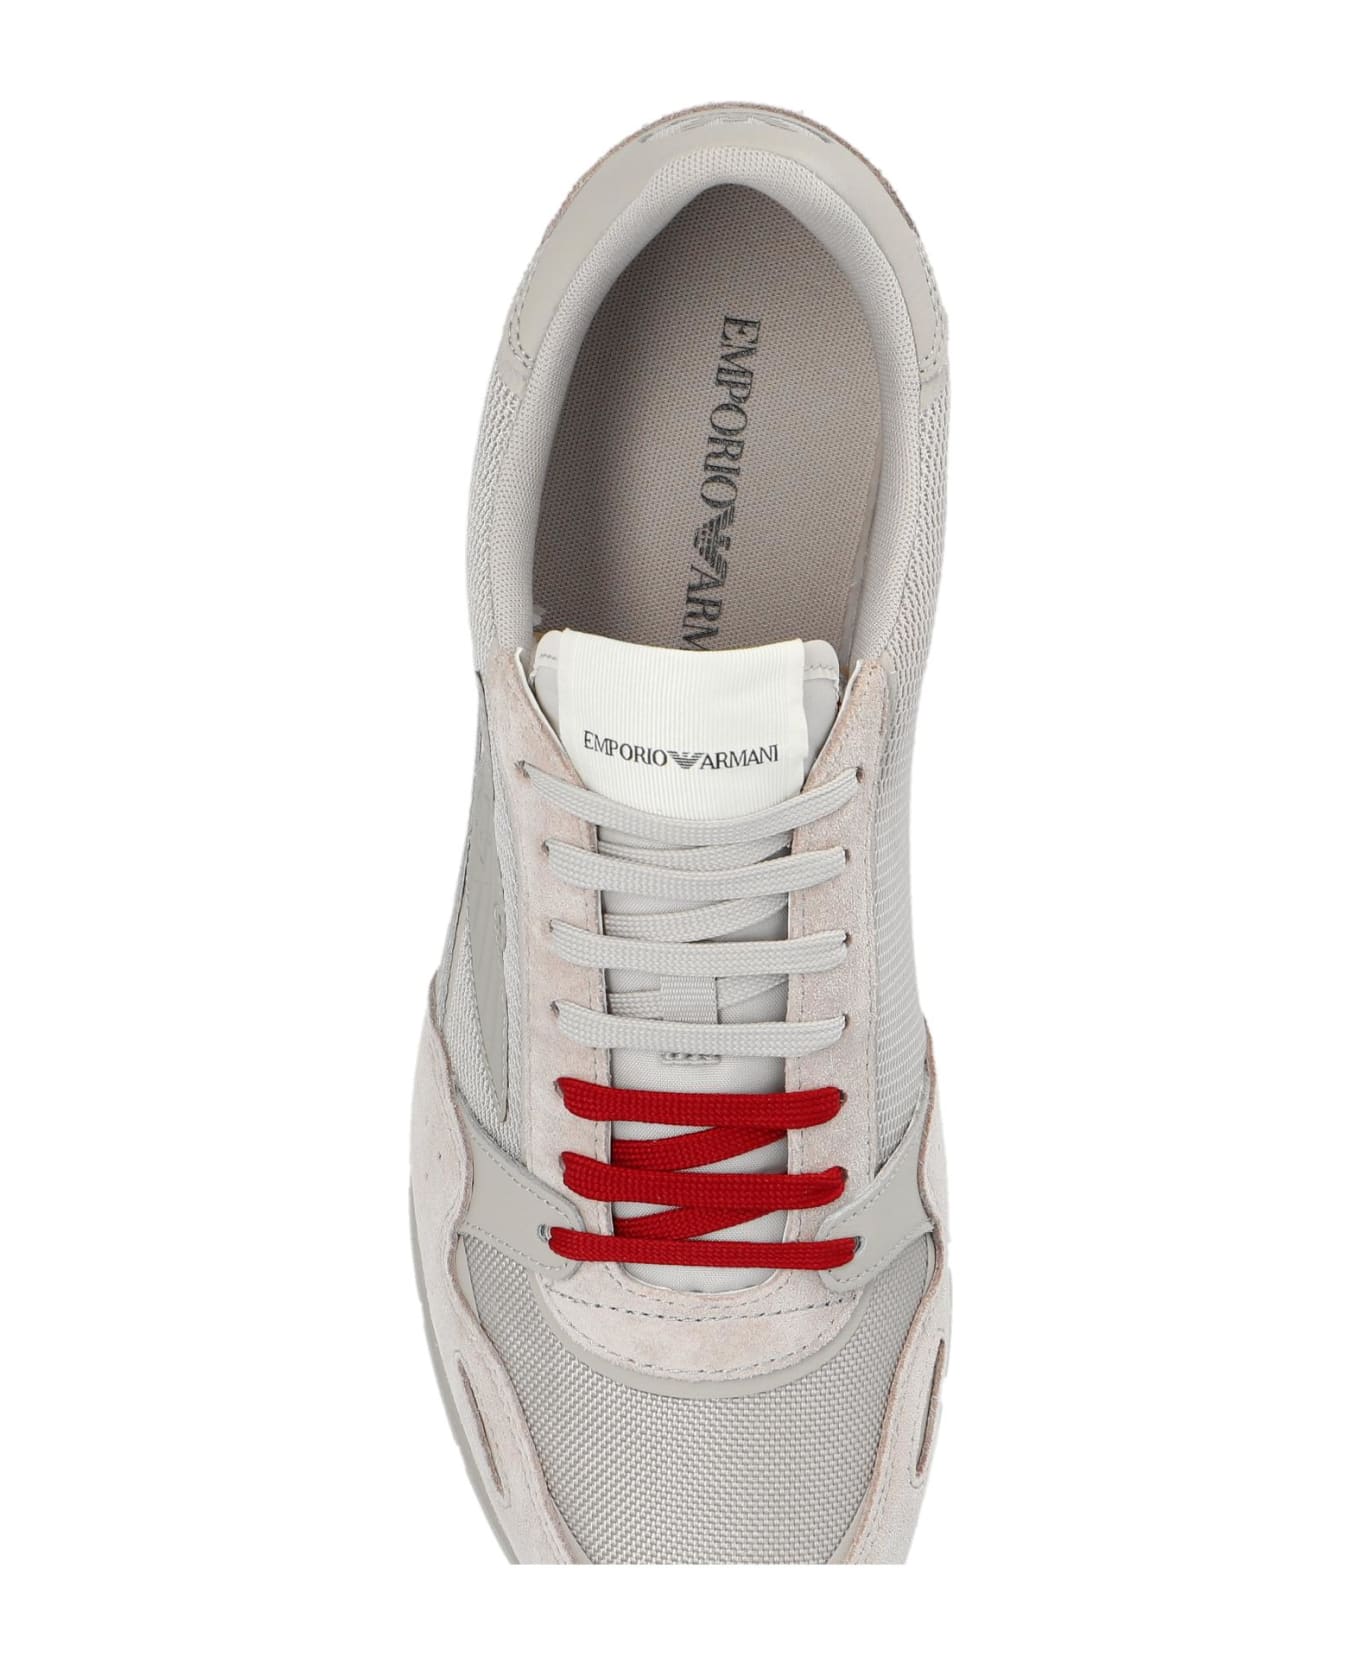 Emporio Armani Sneakers With Logo - Beige スニーカー